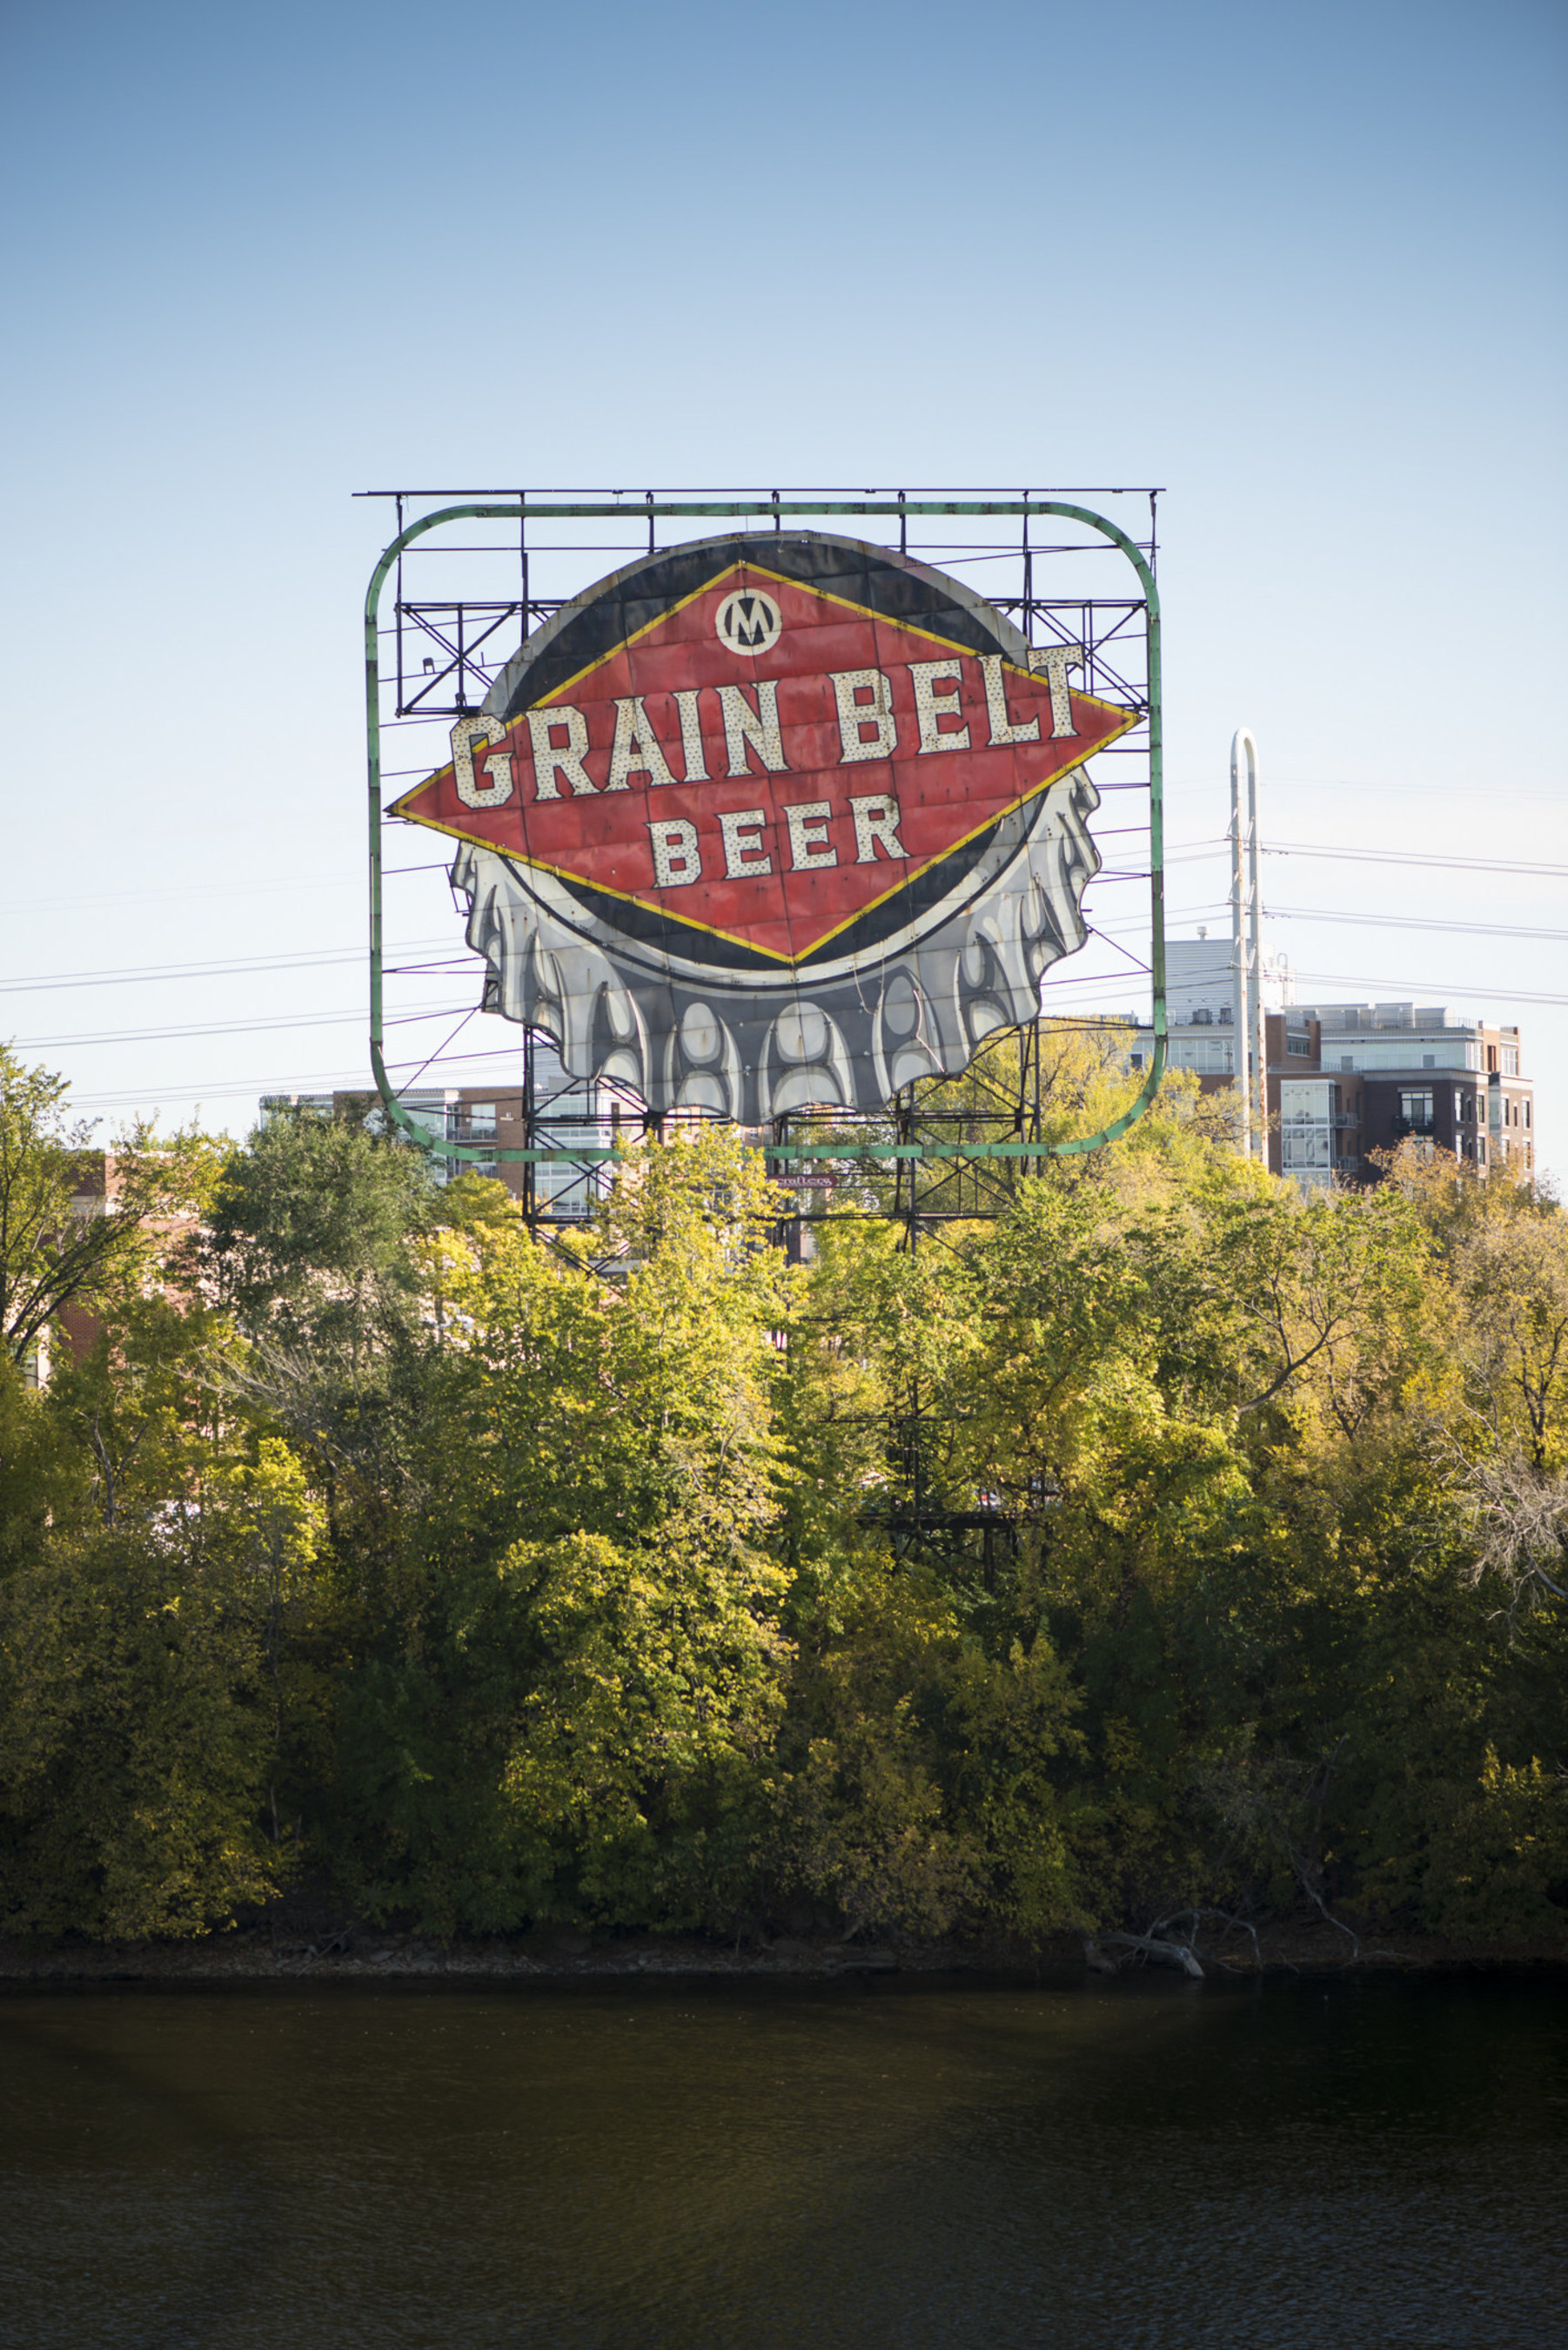 The iconic Grain Belt Beer sign is one of Minneapolis' most-recognized landmarks.